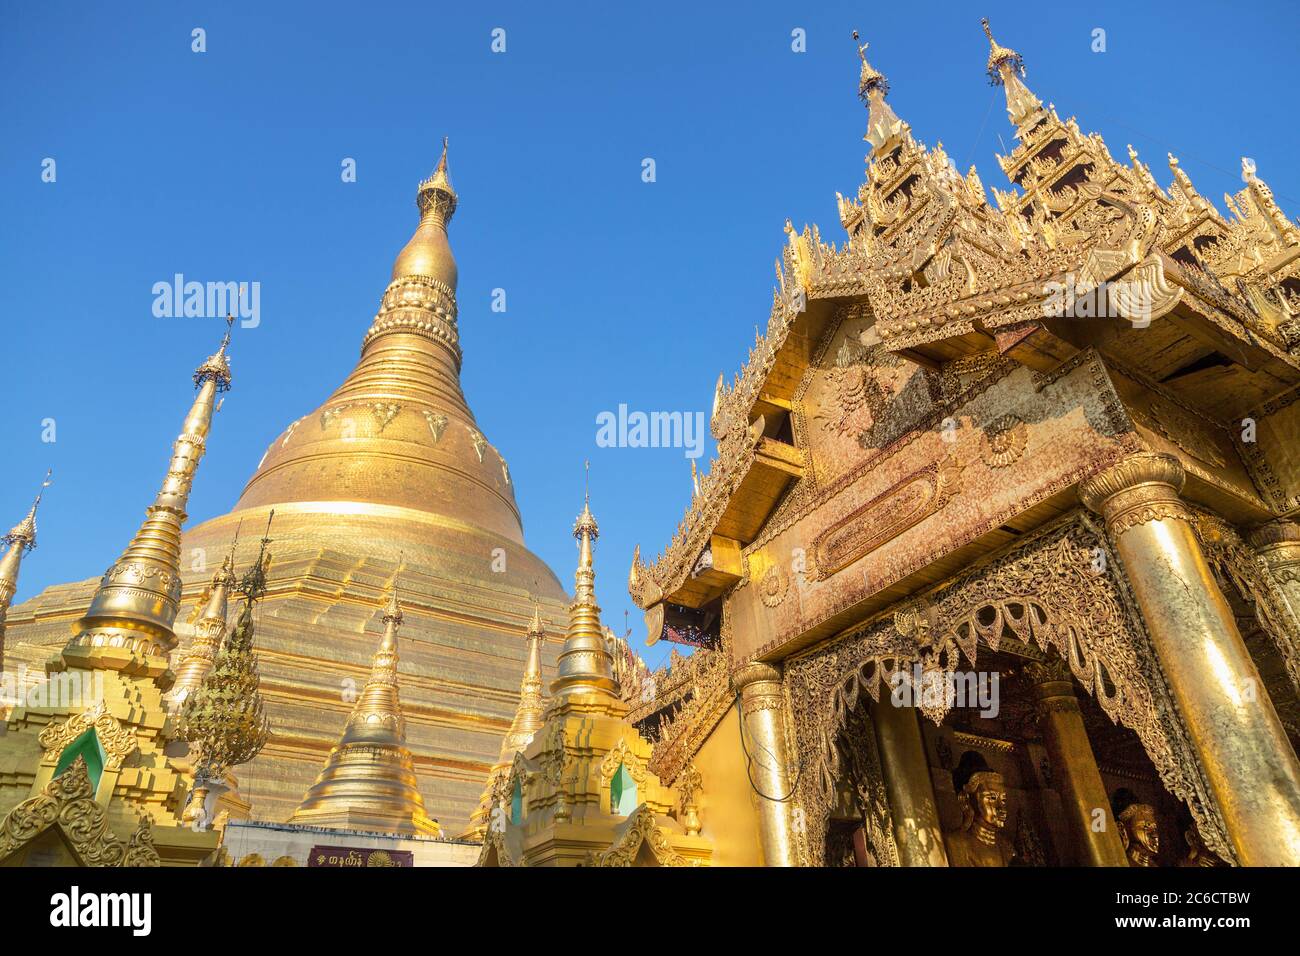 A low angle view of gilded stupas and gilded carvings at the Shwedagon Pagoda in Yangon, Myanmar Stock Photo